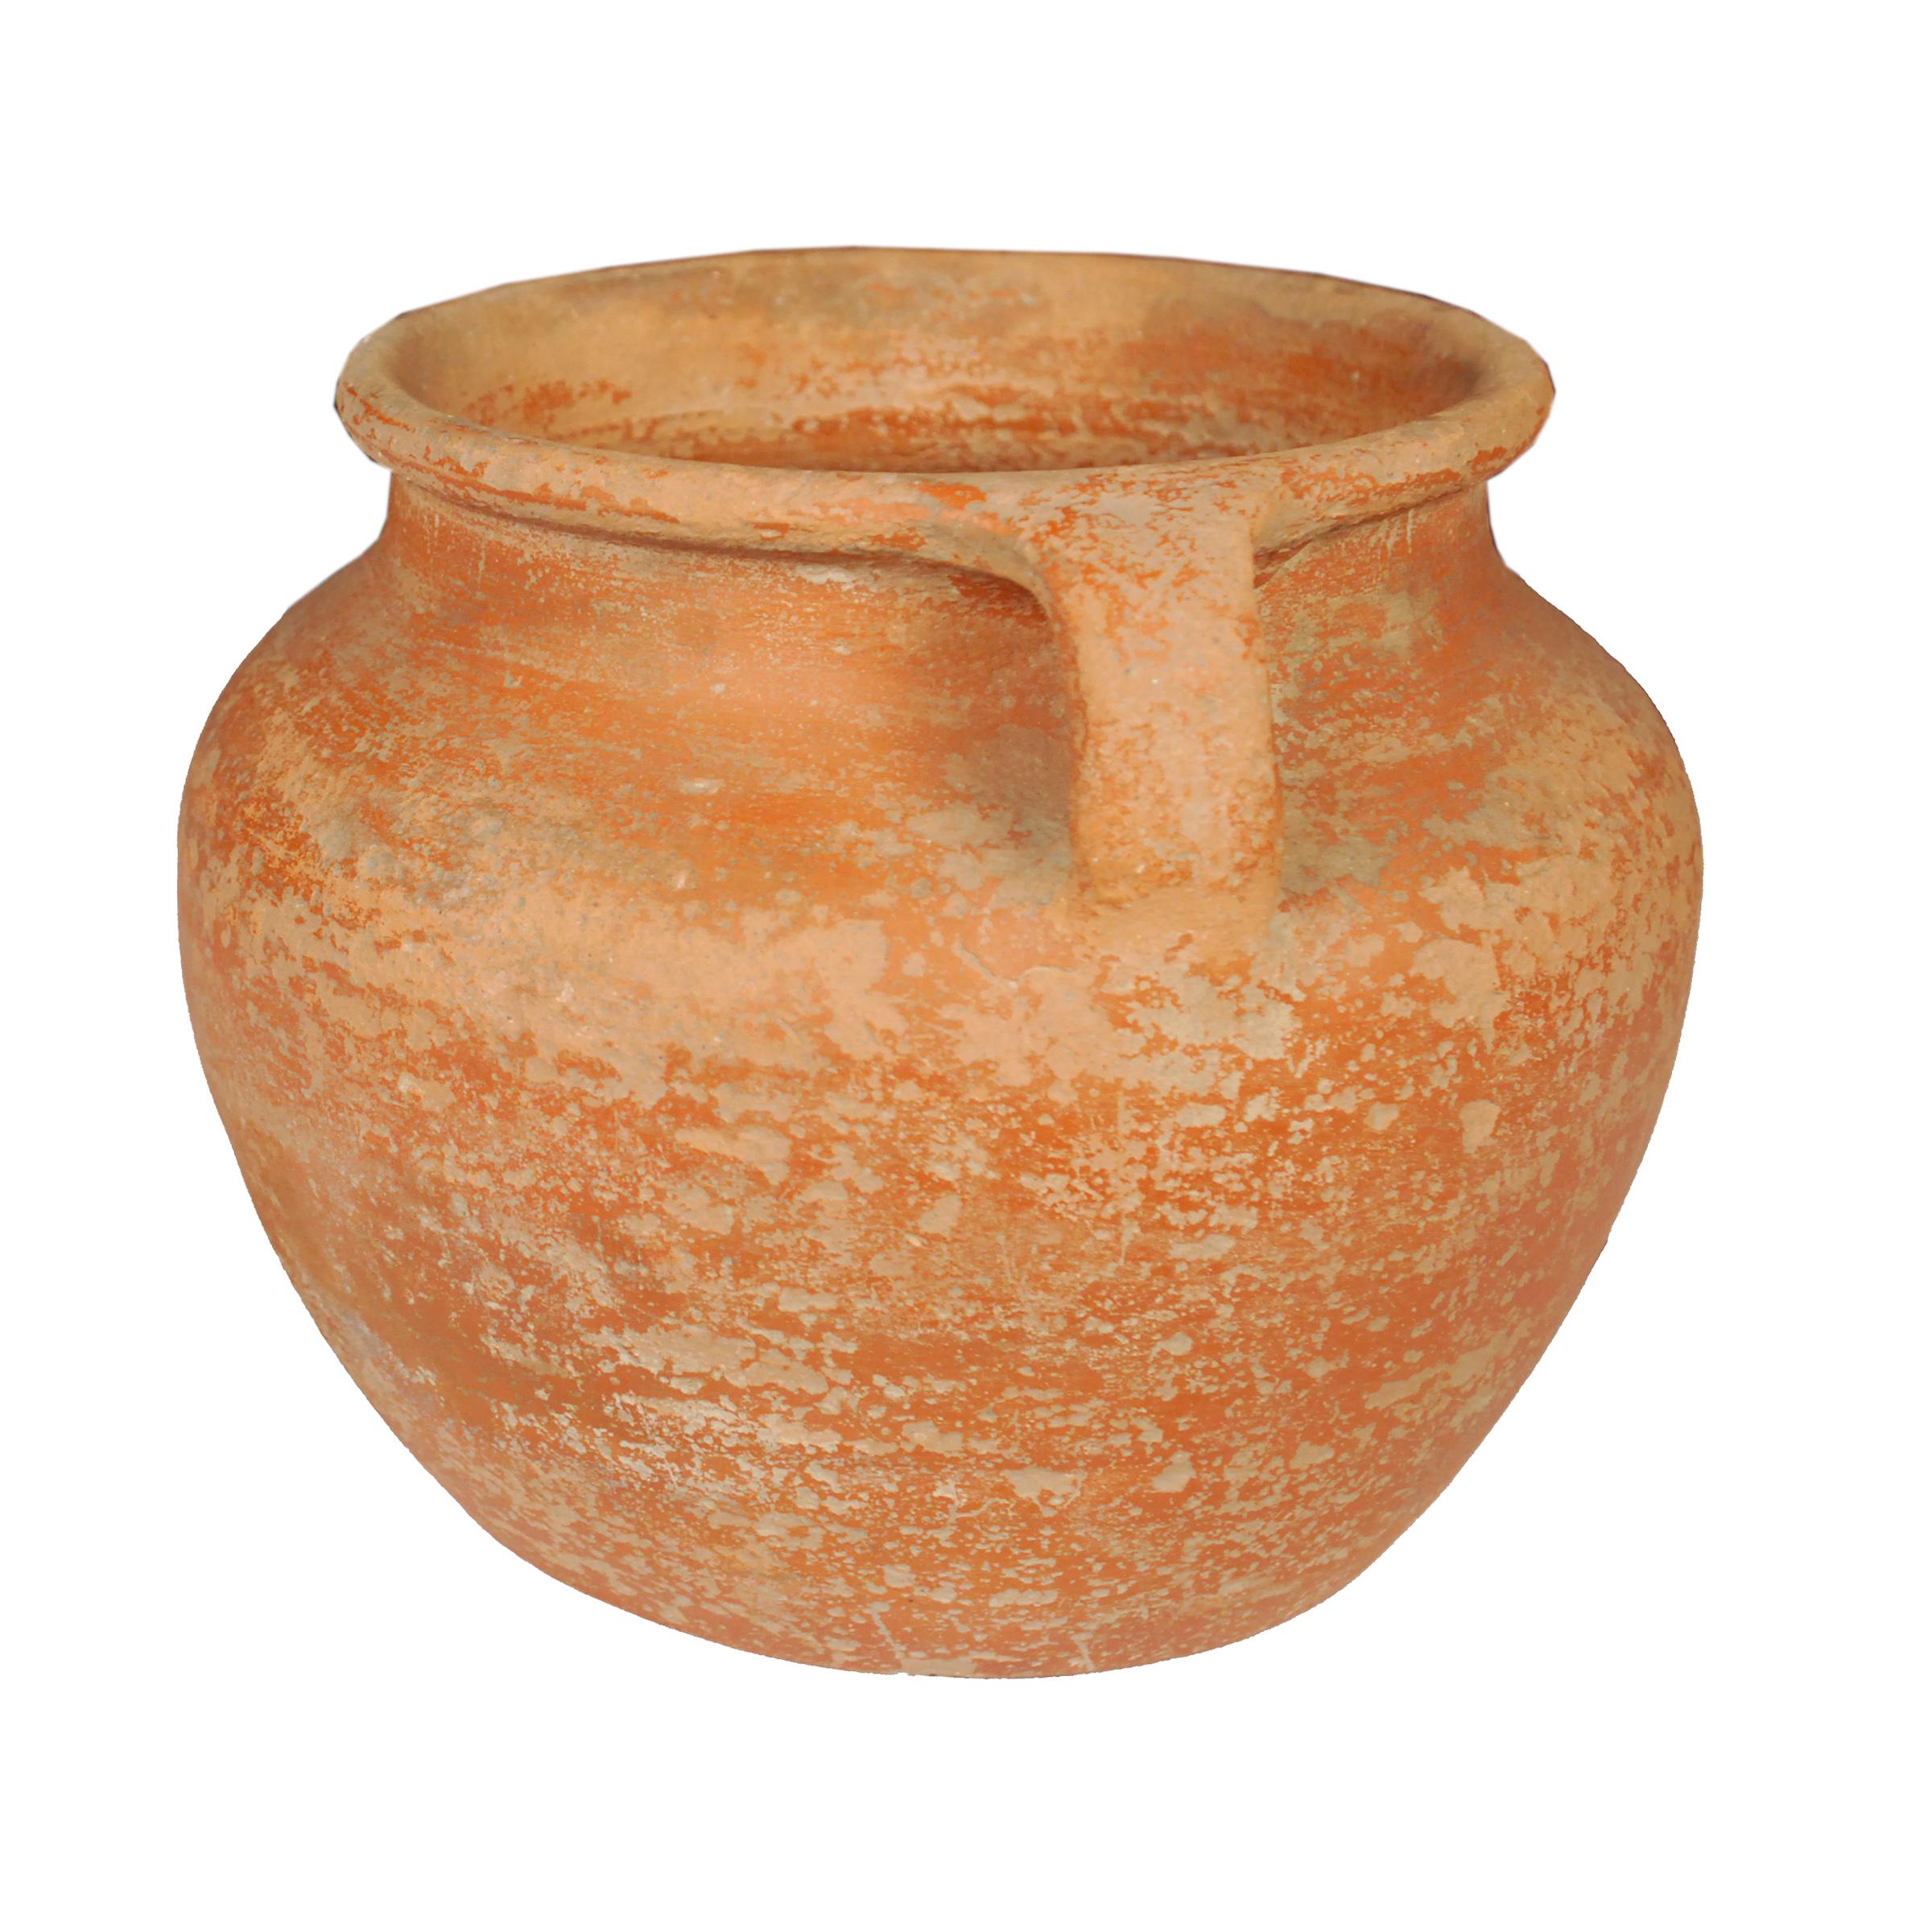 Based on prototypes fired in ancient Chinese kilns, this jar's perfect proportions haven't changed much since the Bronze Age. Keeping in the tradition of its predecessors, this early 20th century ceramic vessel is glazed with a slip of red clay,